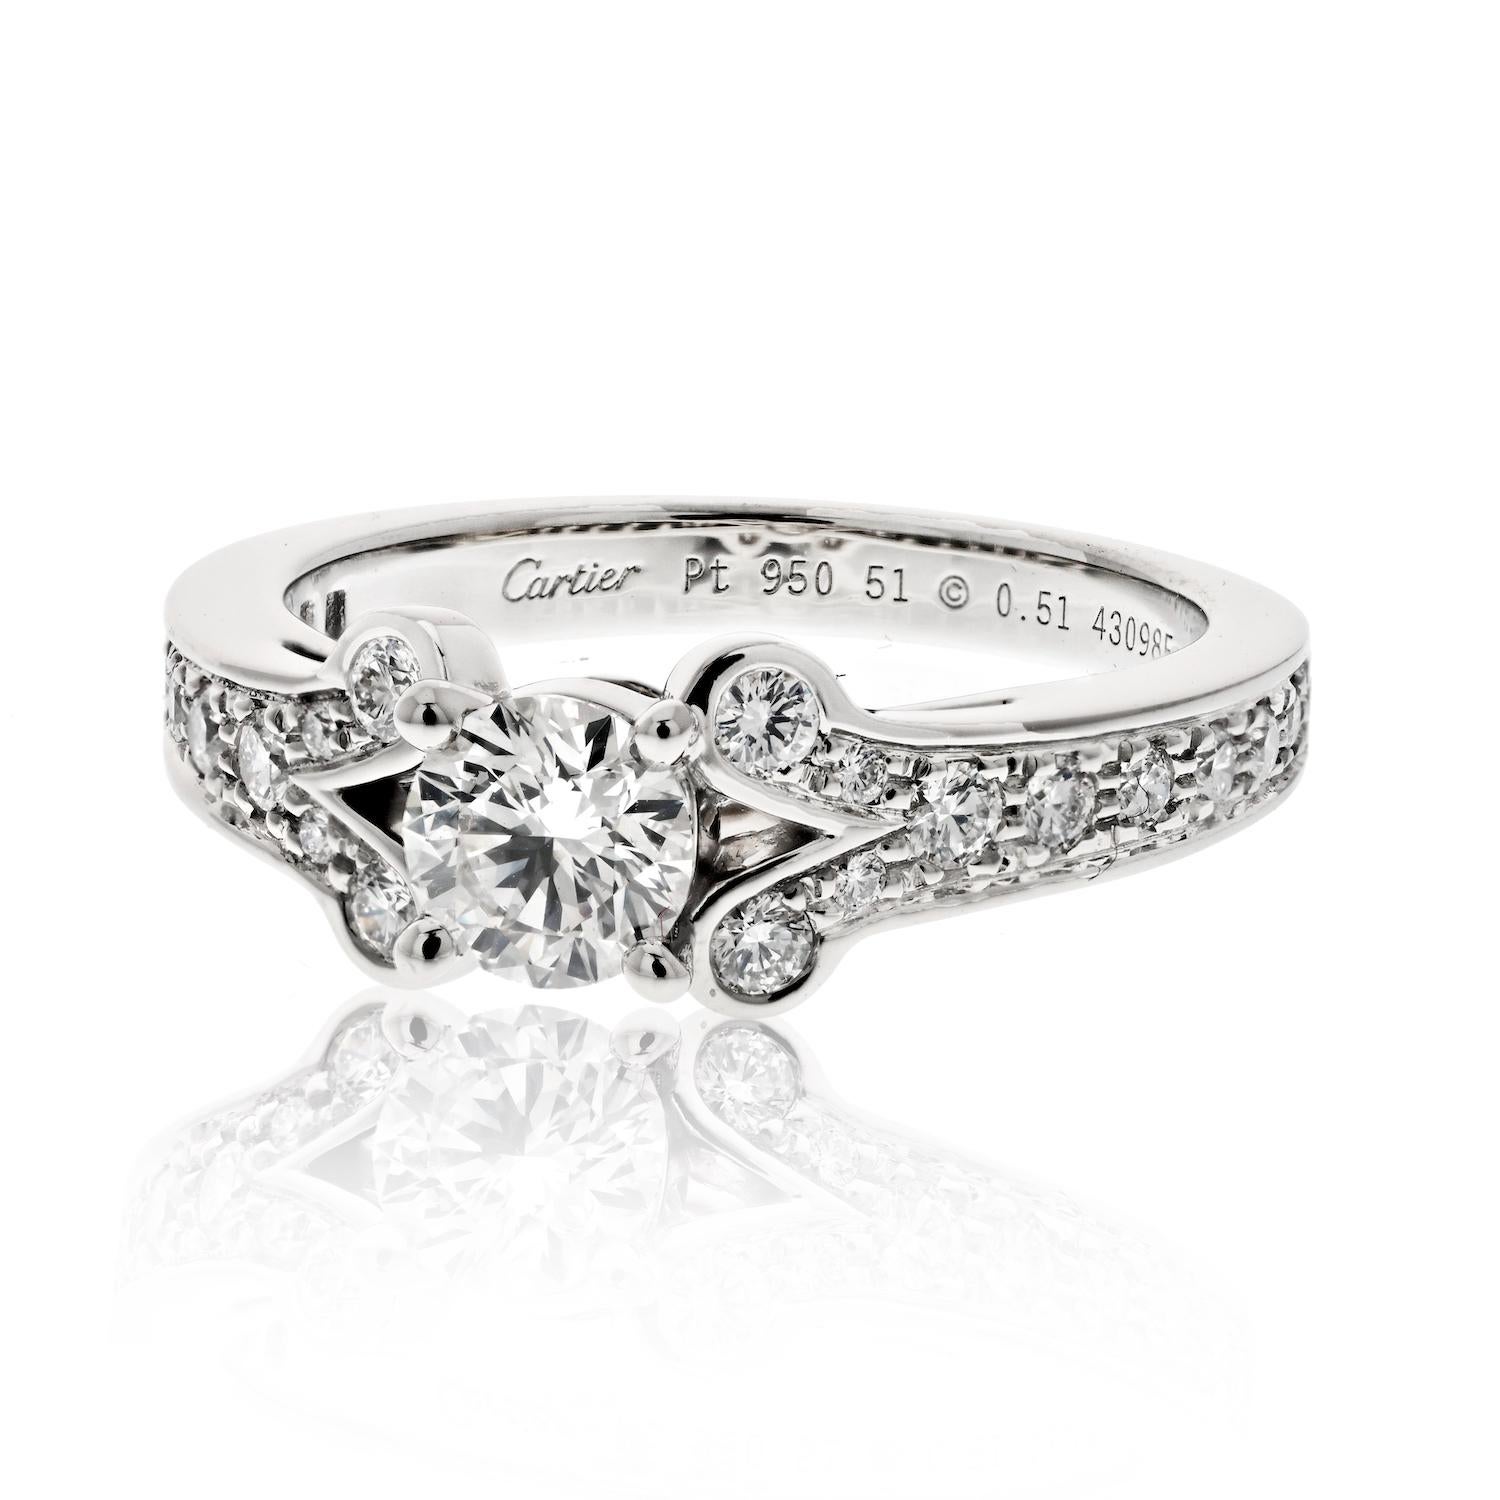 The Cartier diamond engagement ring from the Ballerine collection is a stunning piece of jewelry crafted from platinum and mounted with a 0.51ct round diamond (F-G color, VS1-VS2 clarity approx.) in the center. Additional diamonds also accent this